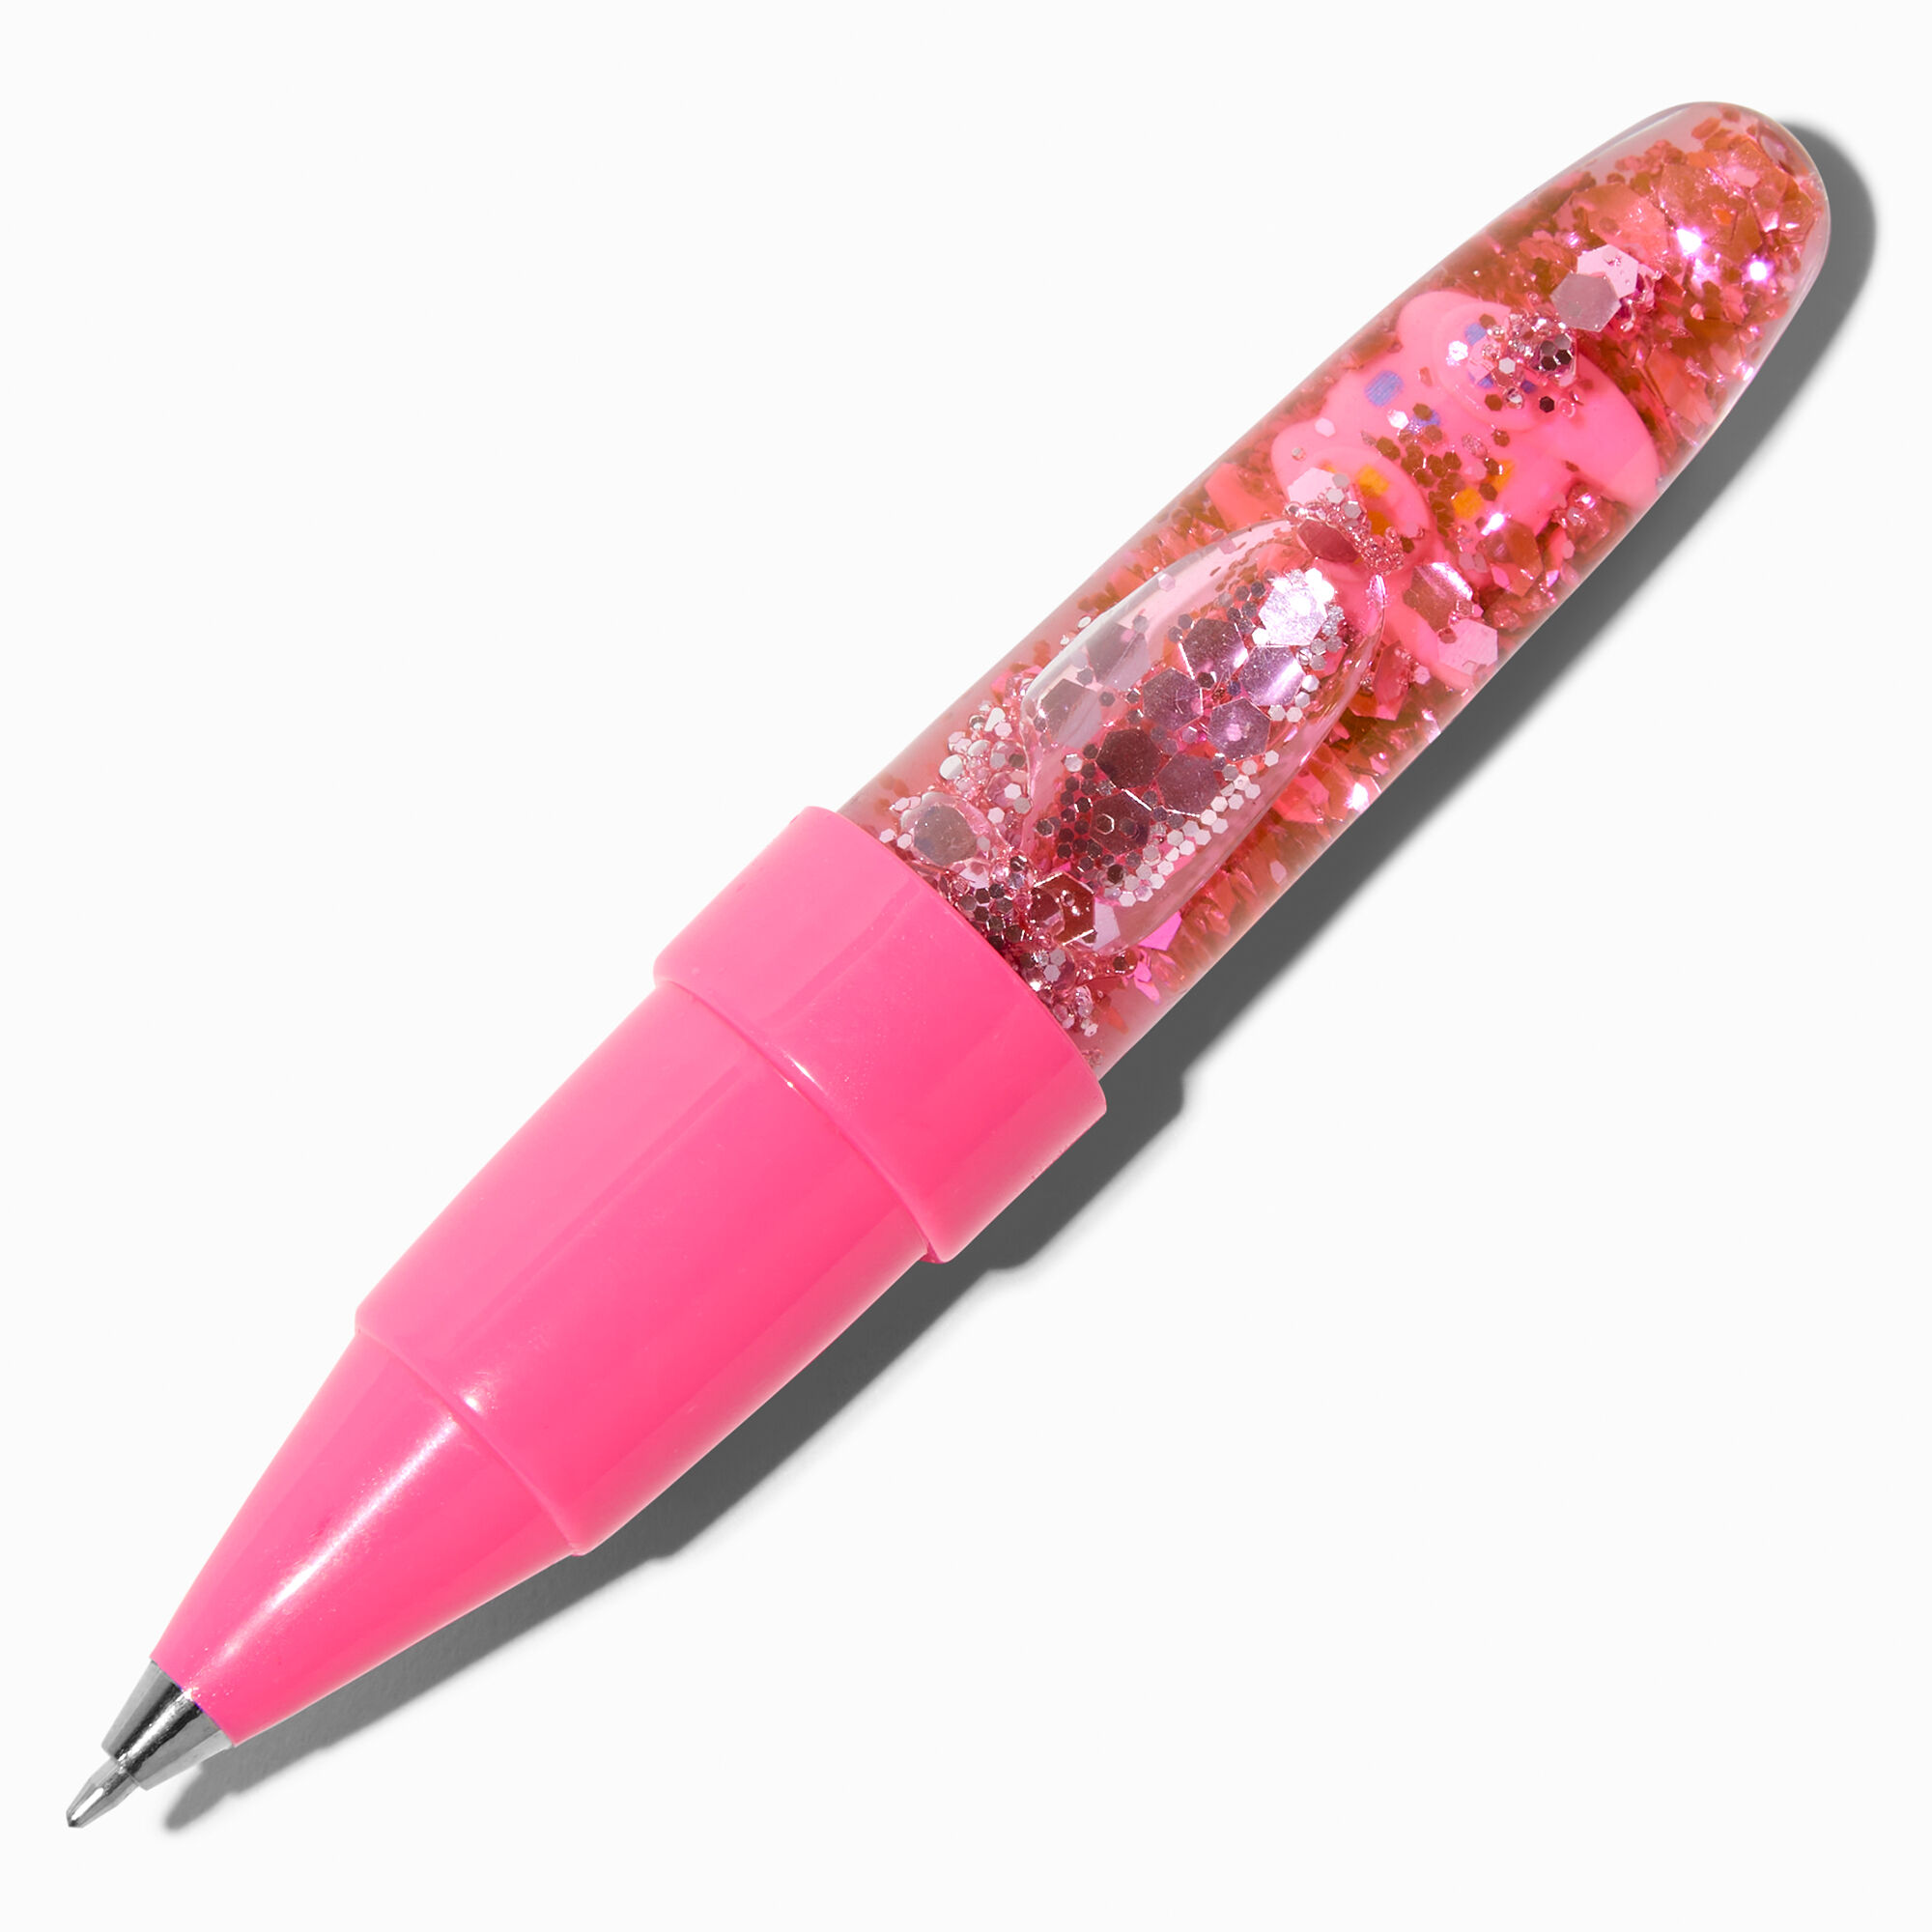 View Claires Heart WaterFilled Glitter Pen Pink information